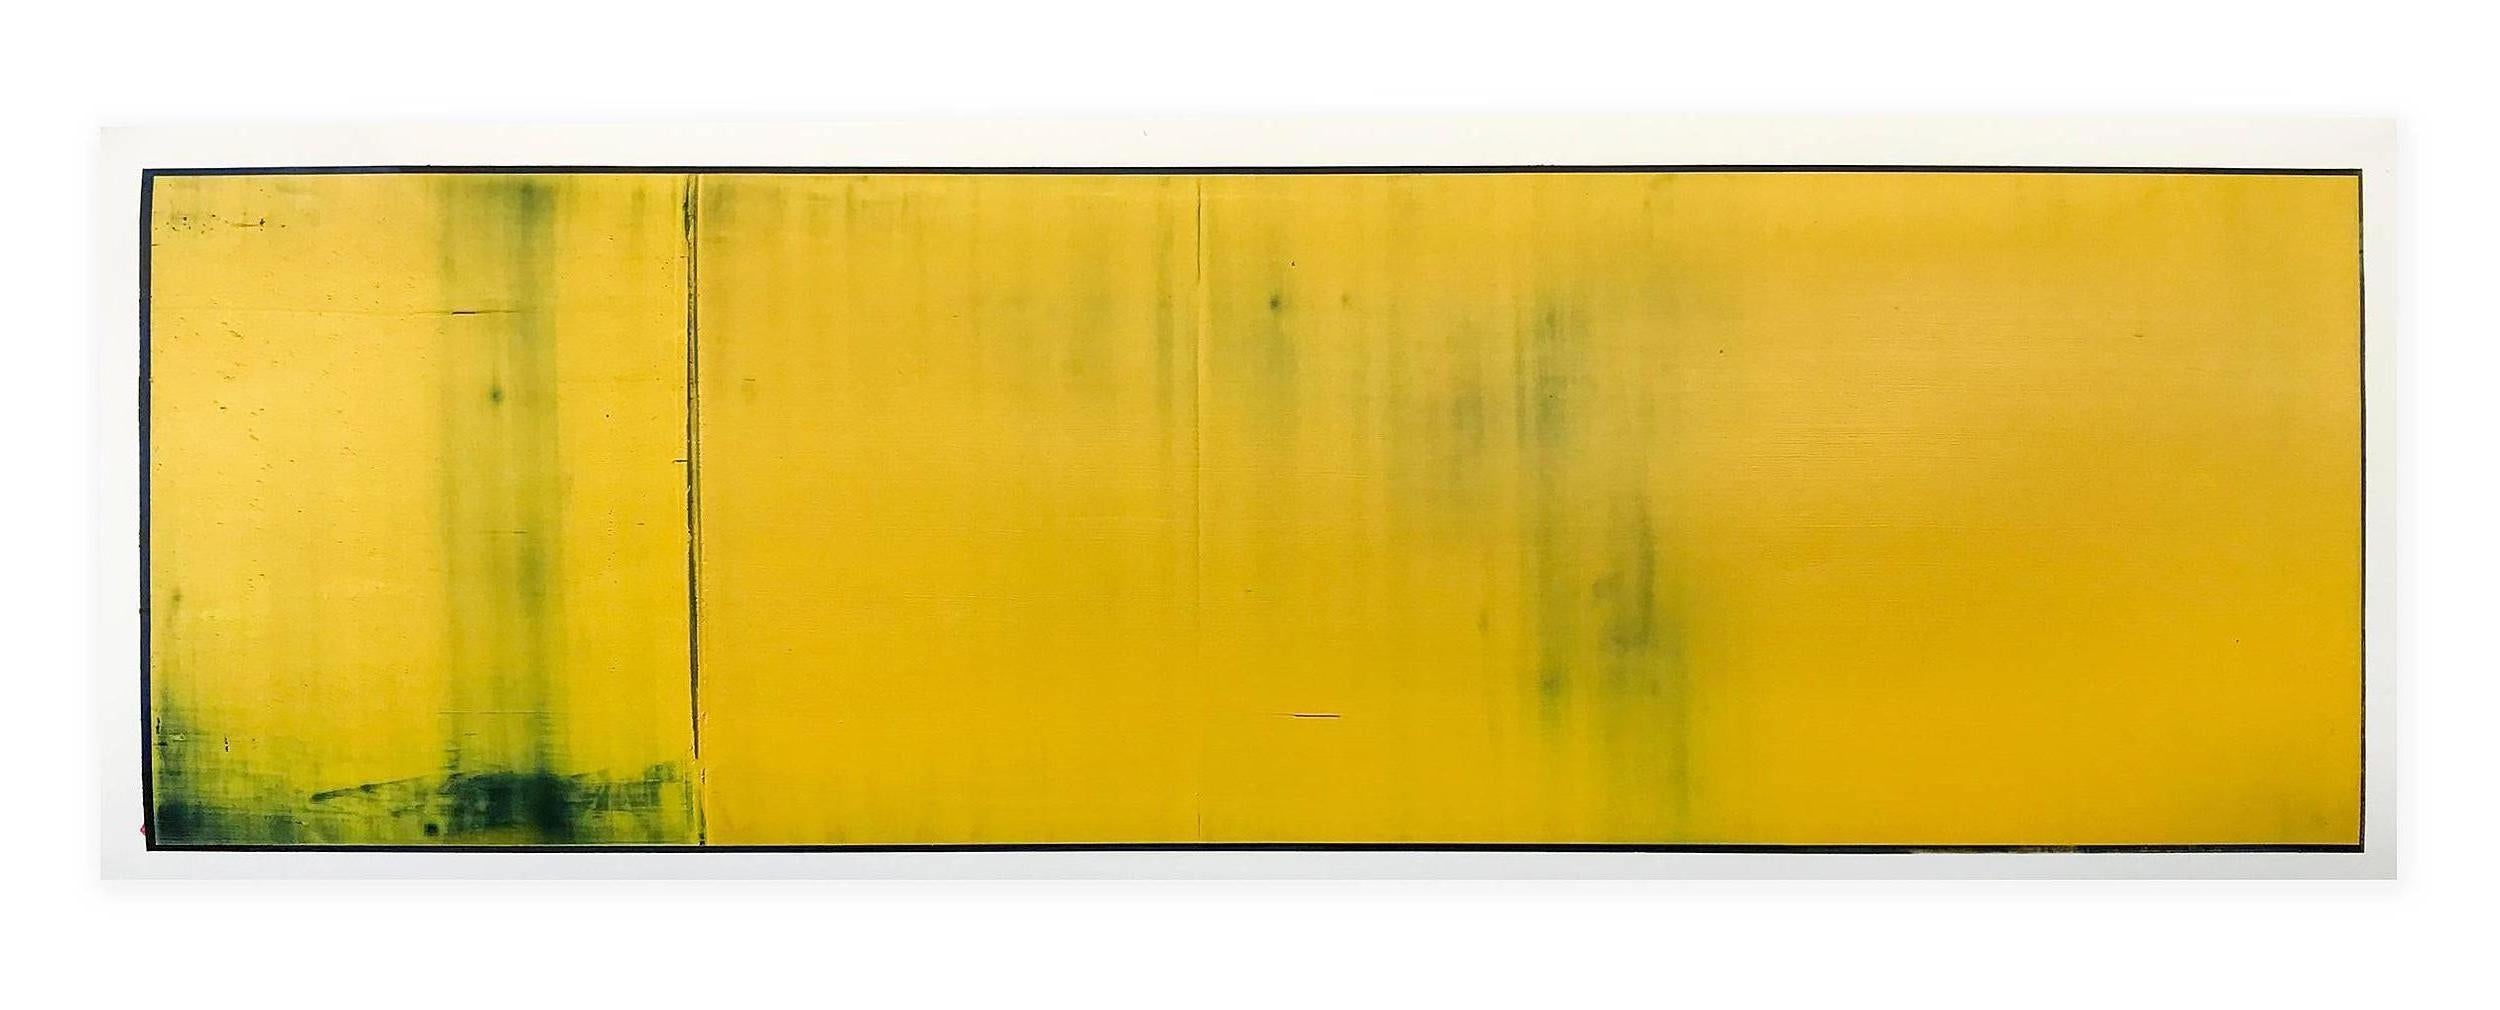 Daniel Brice, Untitled (OX 45), 2017, oil on paper, 18 x 51 inches, abstract, color field painting on Arches archival paper specifically made for oil paint. This piece is predominantly yellow. 

Saturated color is Brice’s tool to relate the